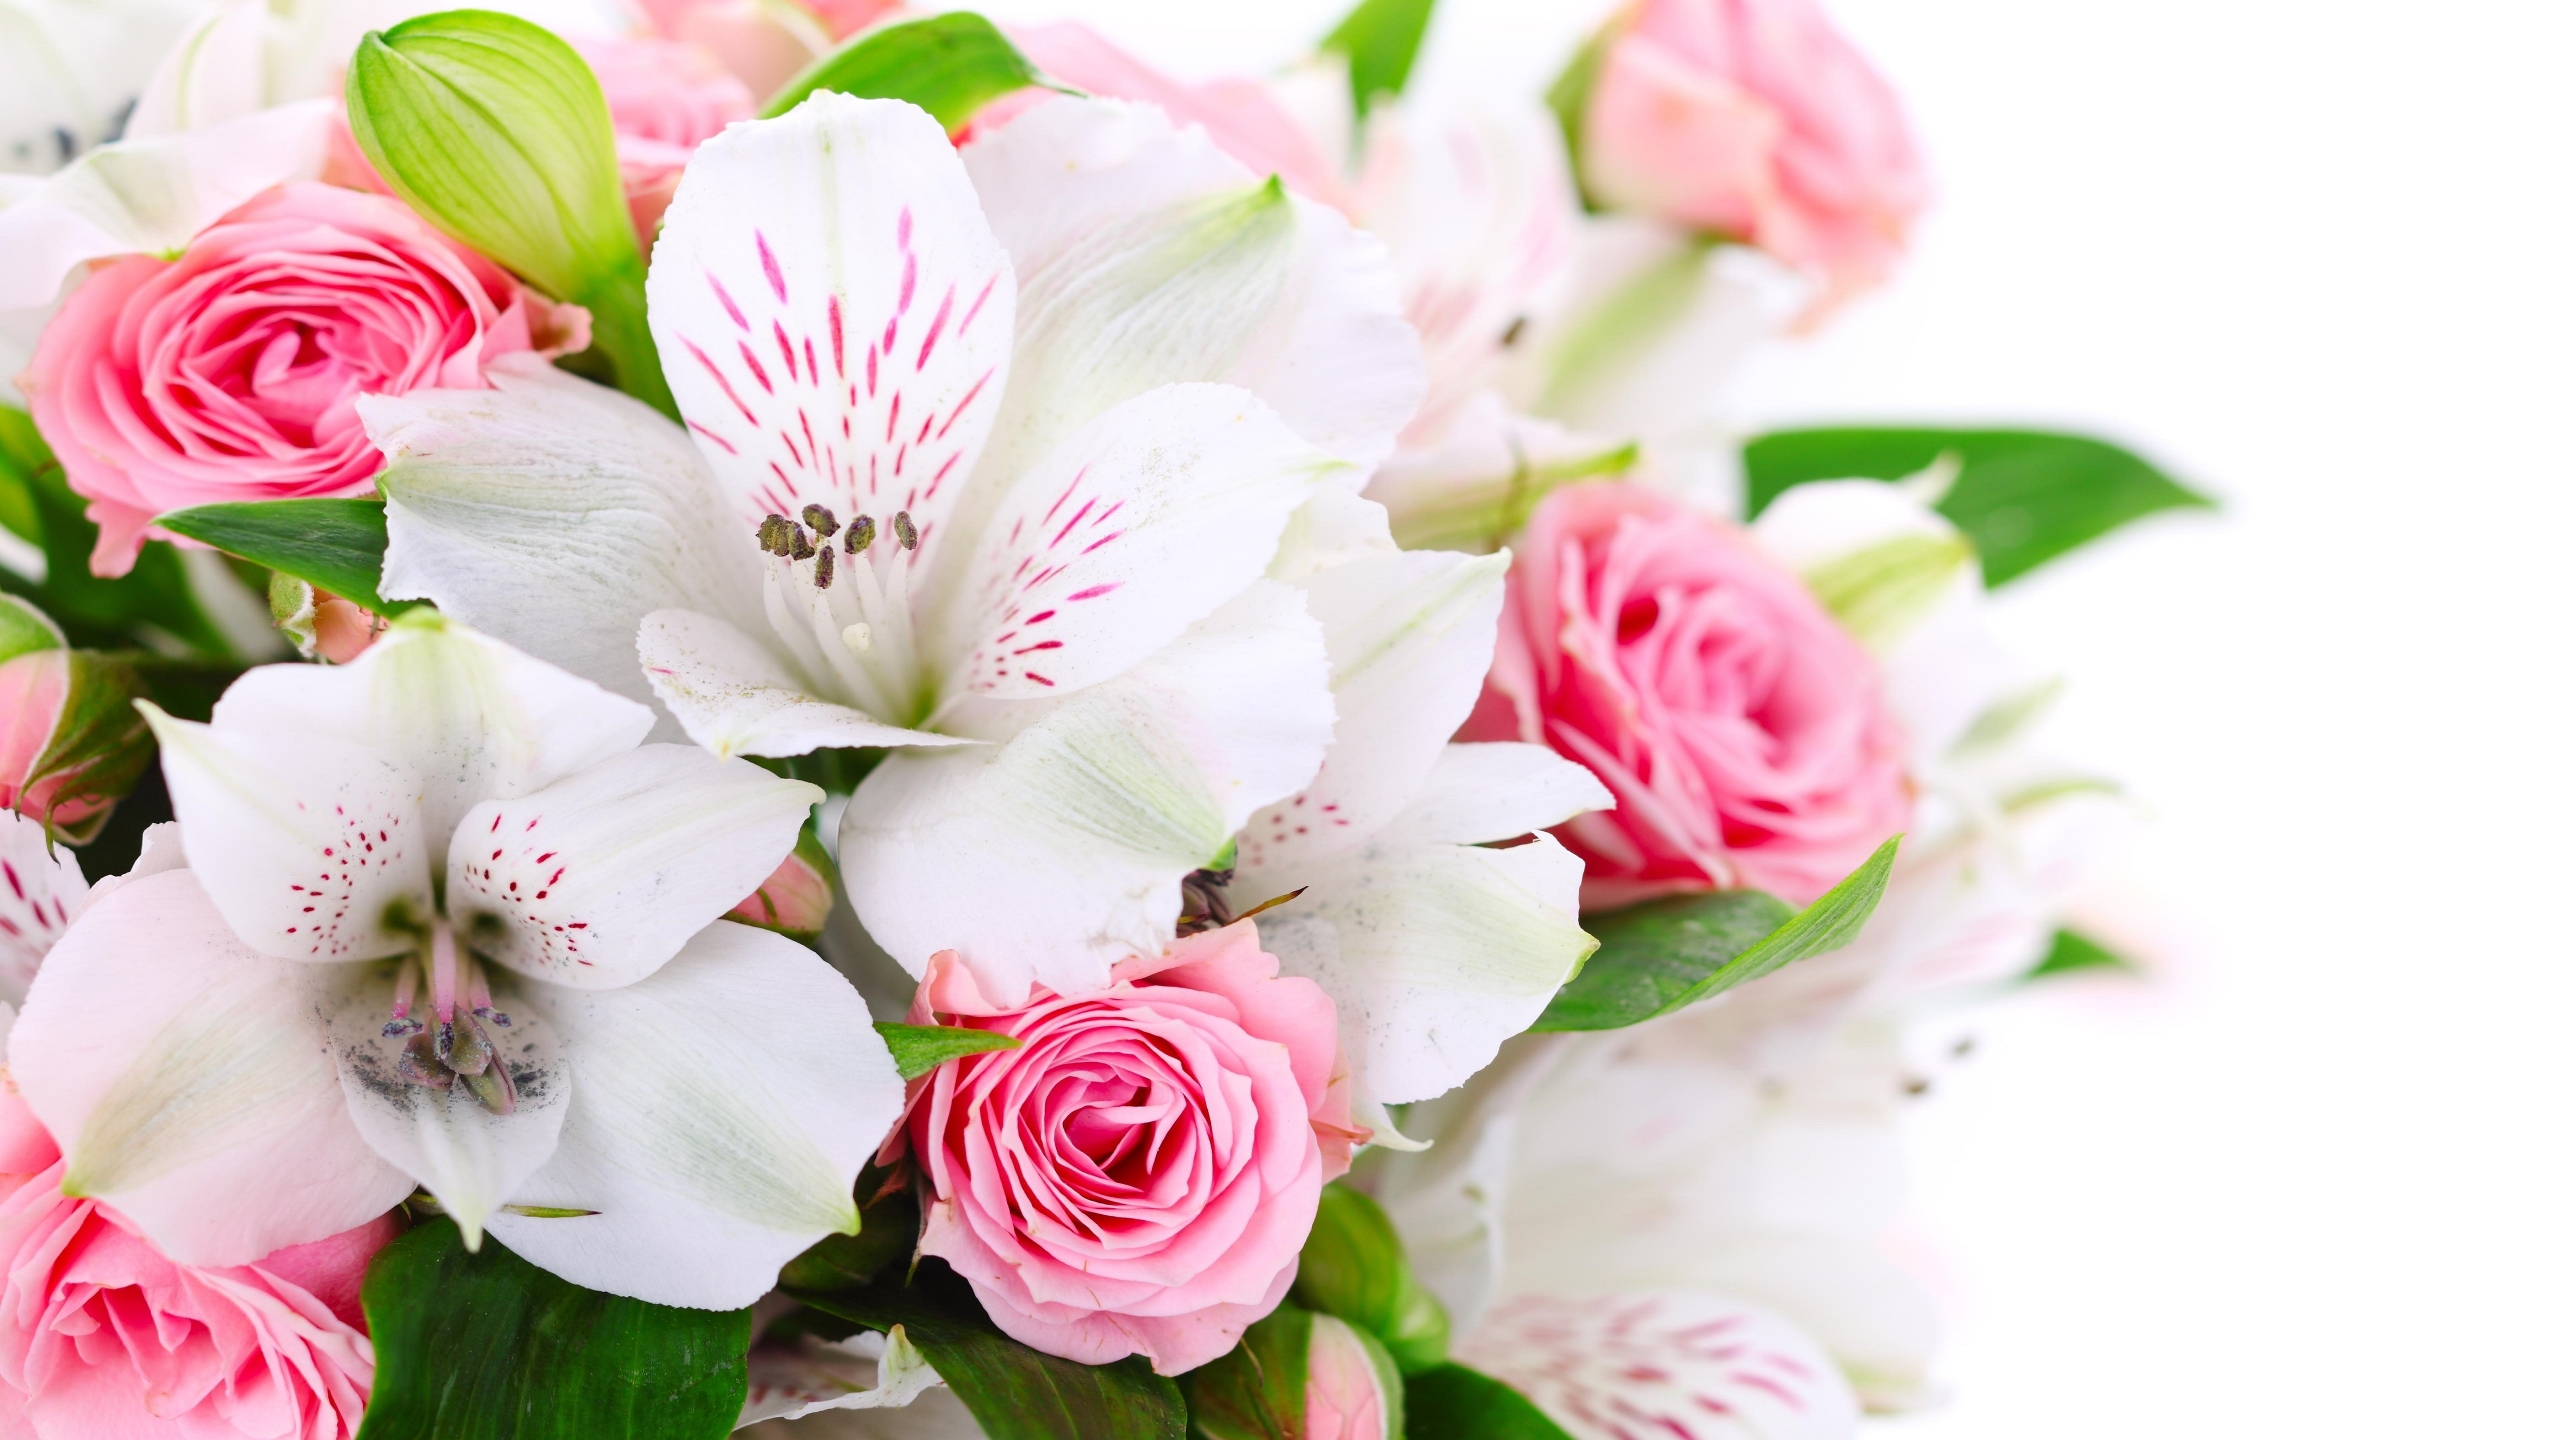 Pink Roses and White Lilies  for 2560 x 1440 HDTV resolution